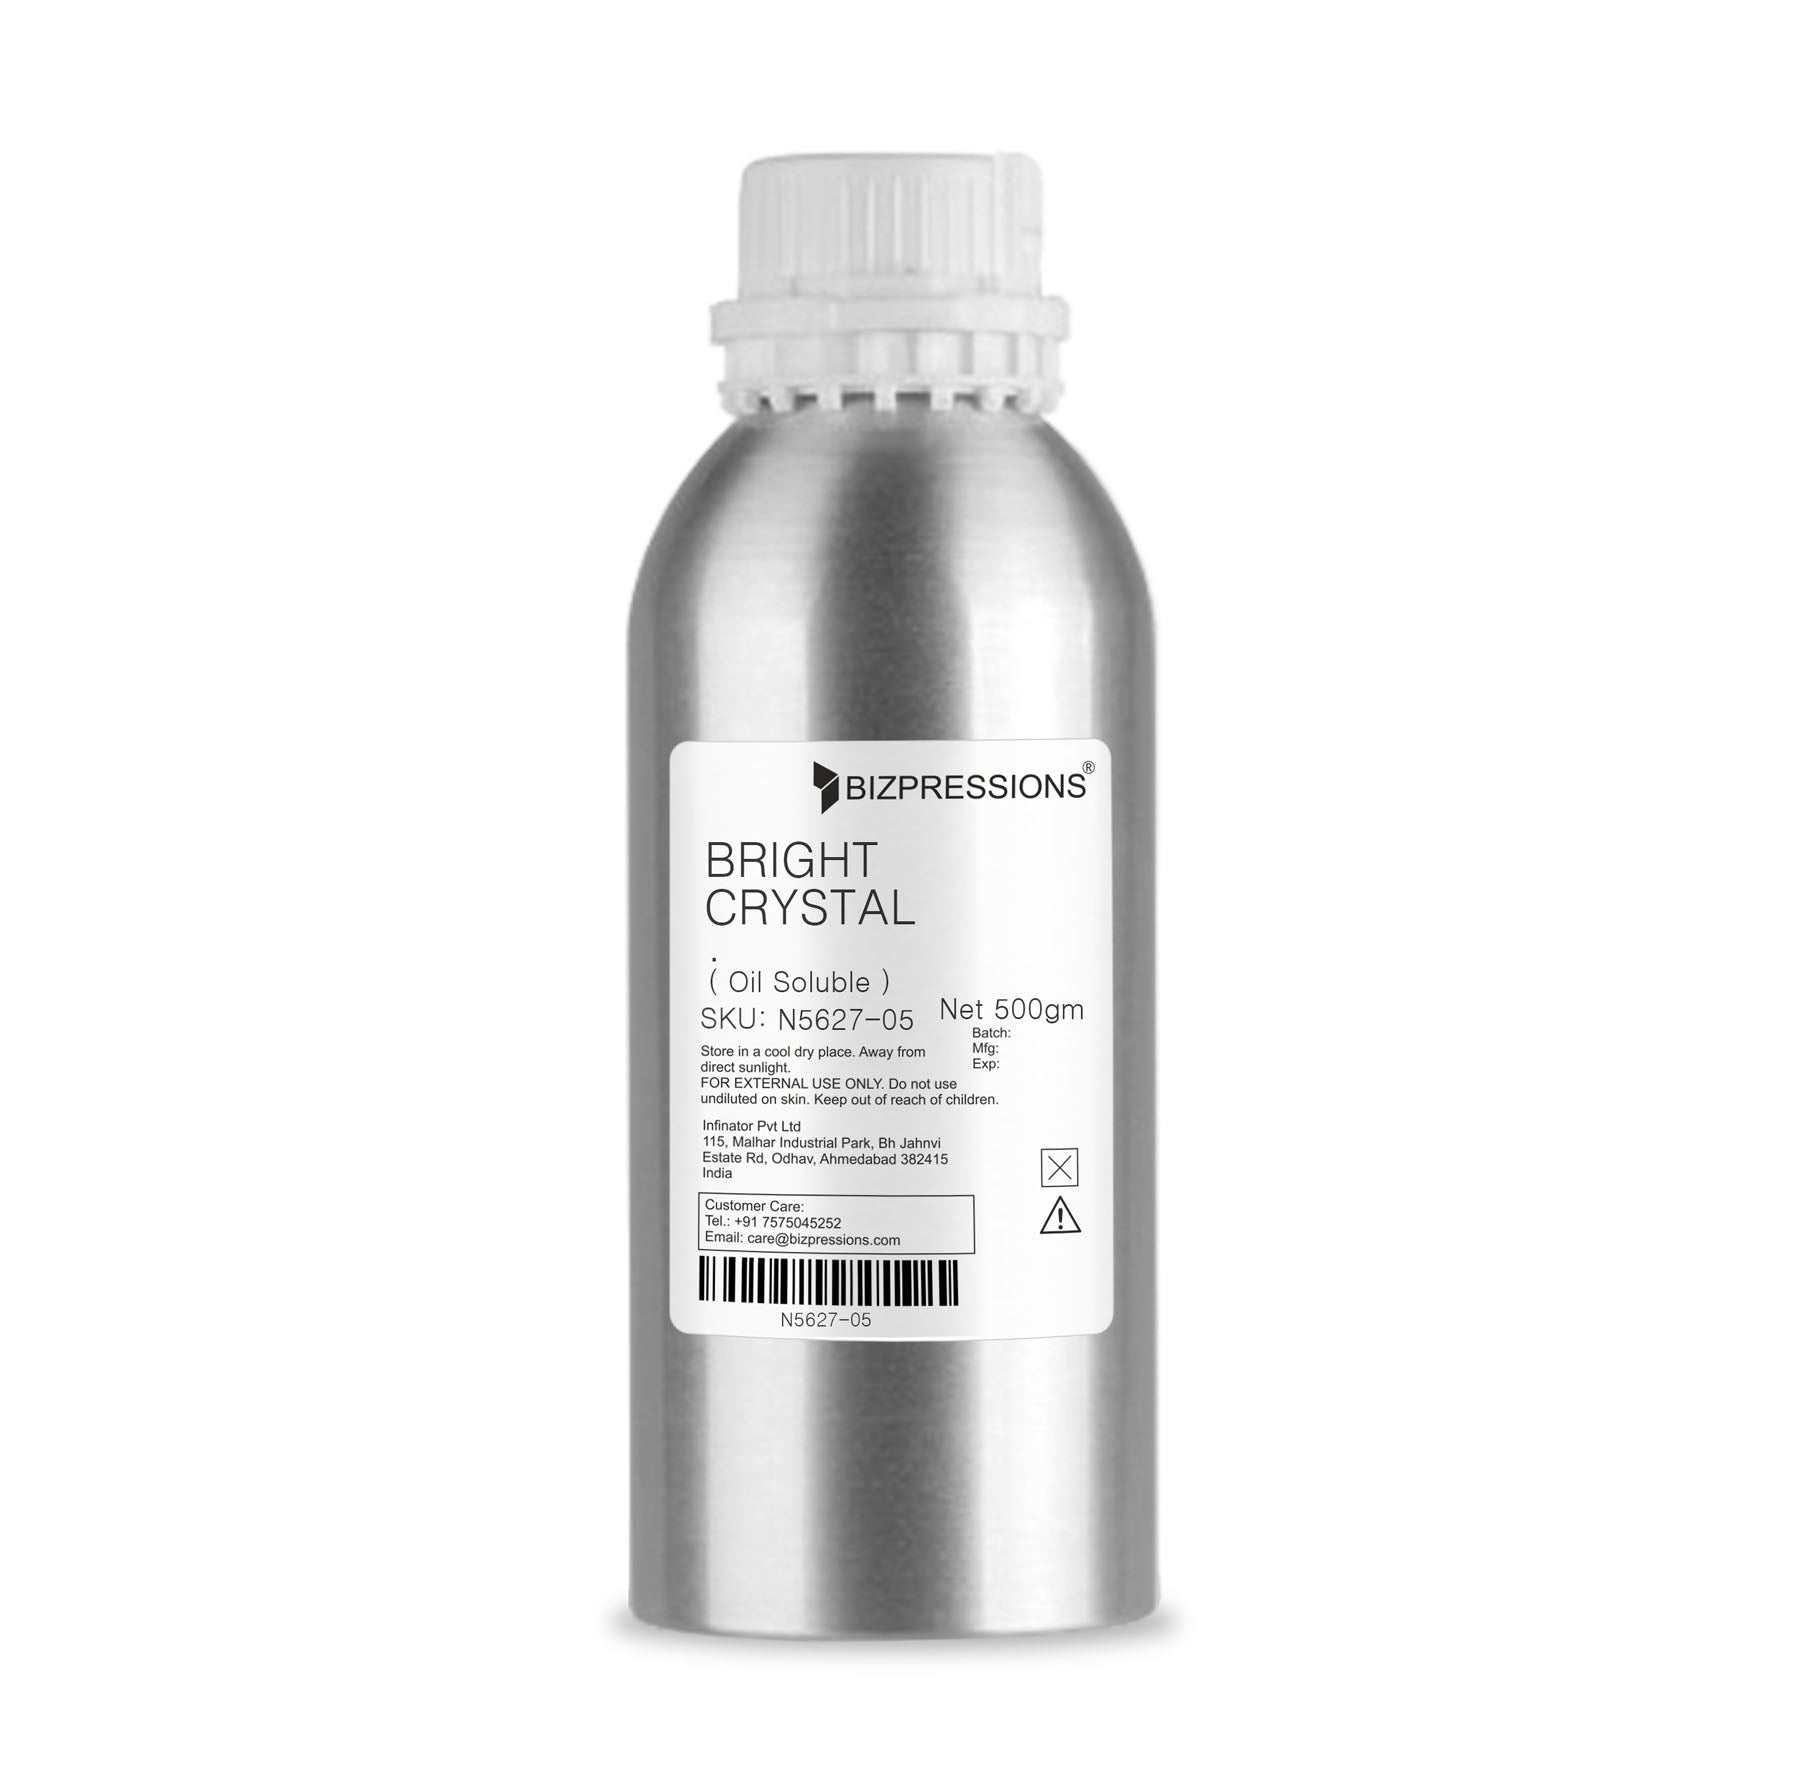 BRIGHT CRYSTAL - Fragrance ( Oil Soluble ) - 500 gm